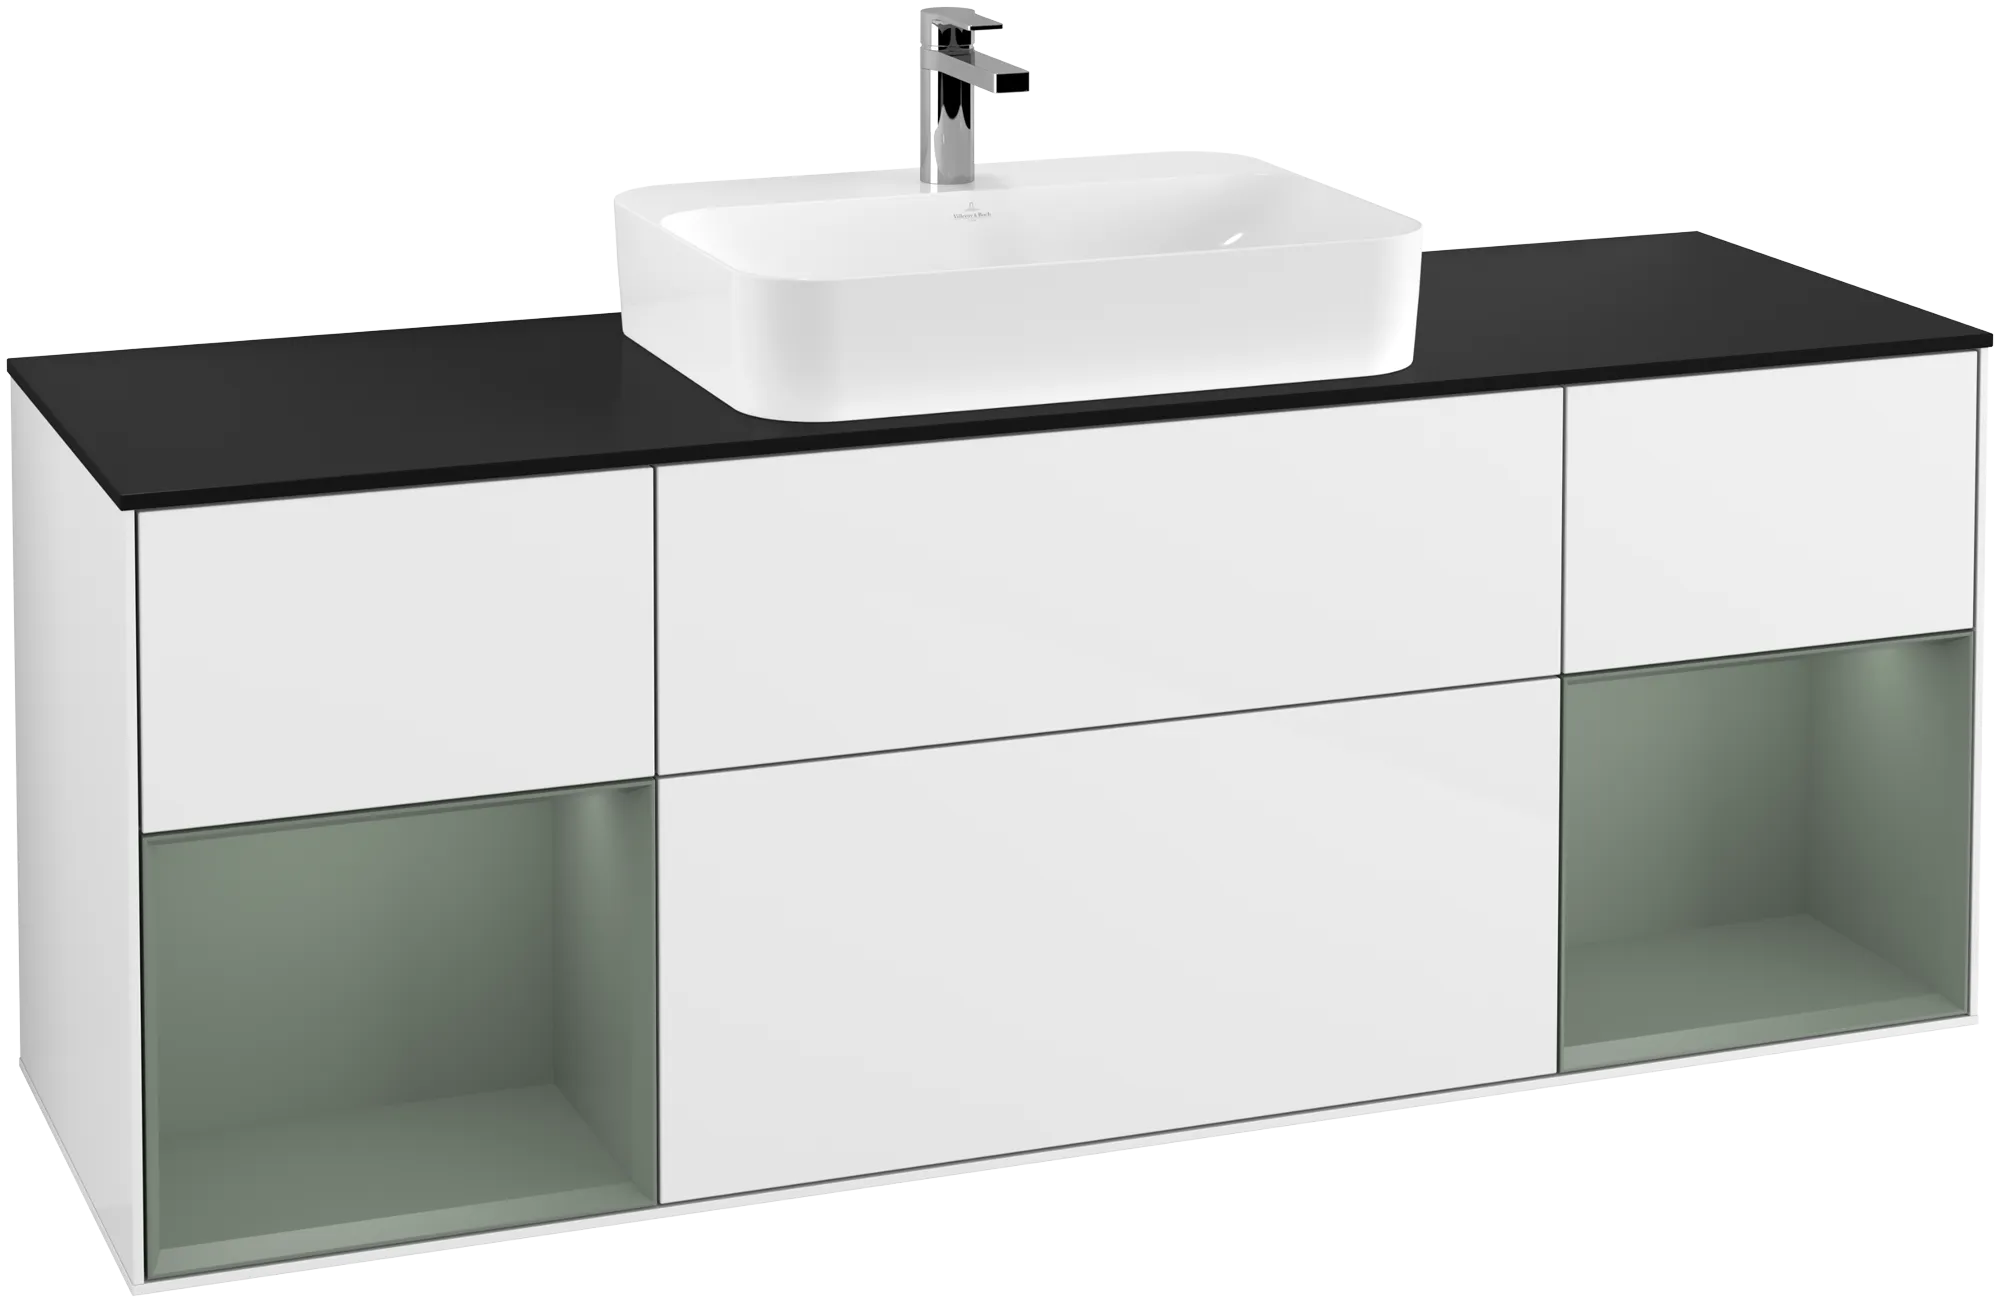 Picture of VILLEROY BOCH Finion Vanity unit, with lighting, 4 pull-out compartments, 1600 x 603 x 501 mm, Glossy White Lacquer / Olive Matt Lacquer / Glass Black Matt #G452GMGF